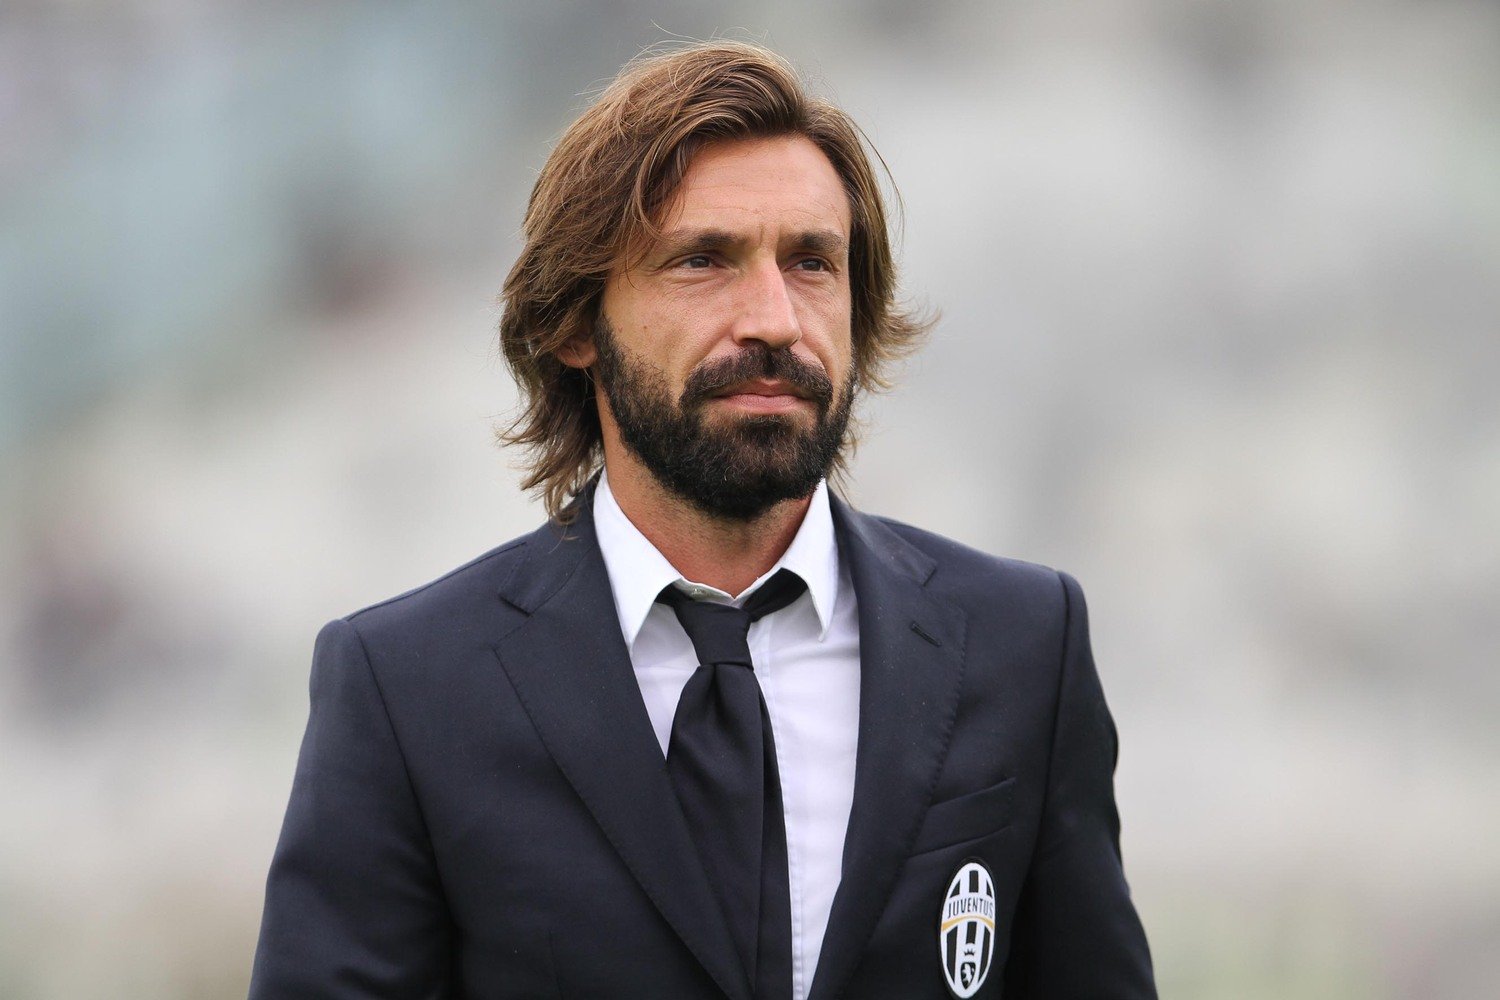 PIRLO'S FATE IN JUVENTUS TO BE DECIDED ON MONDAY